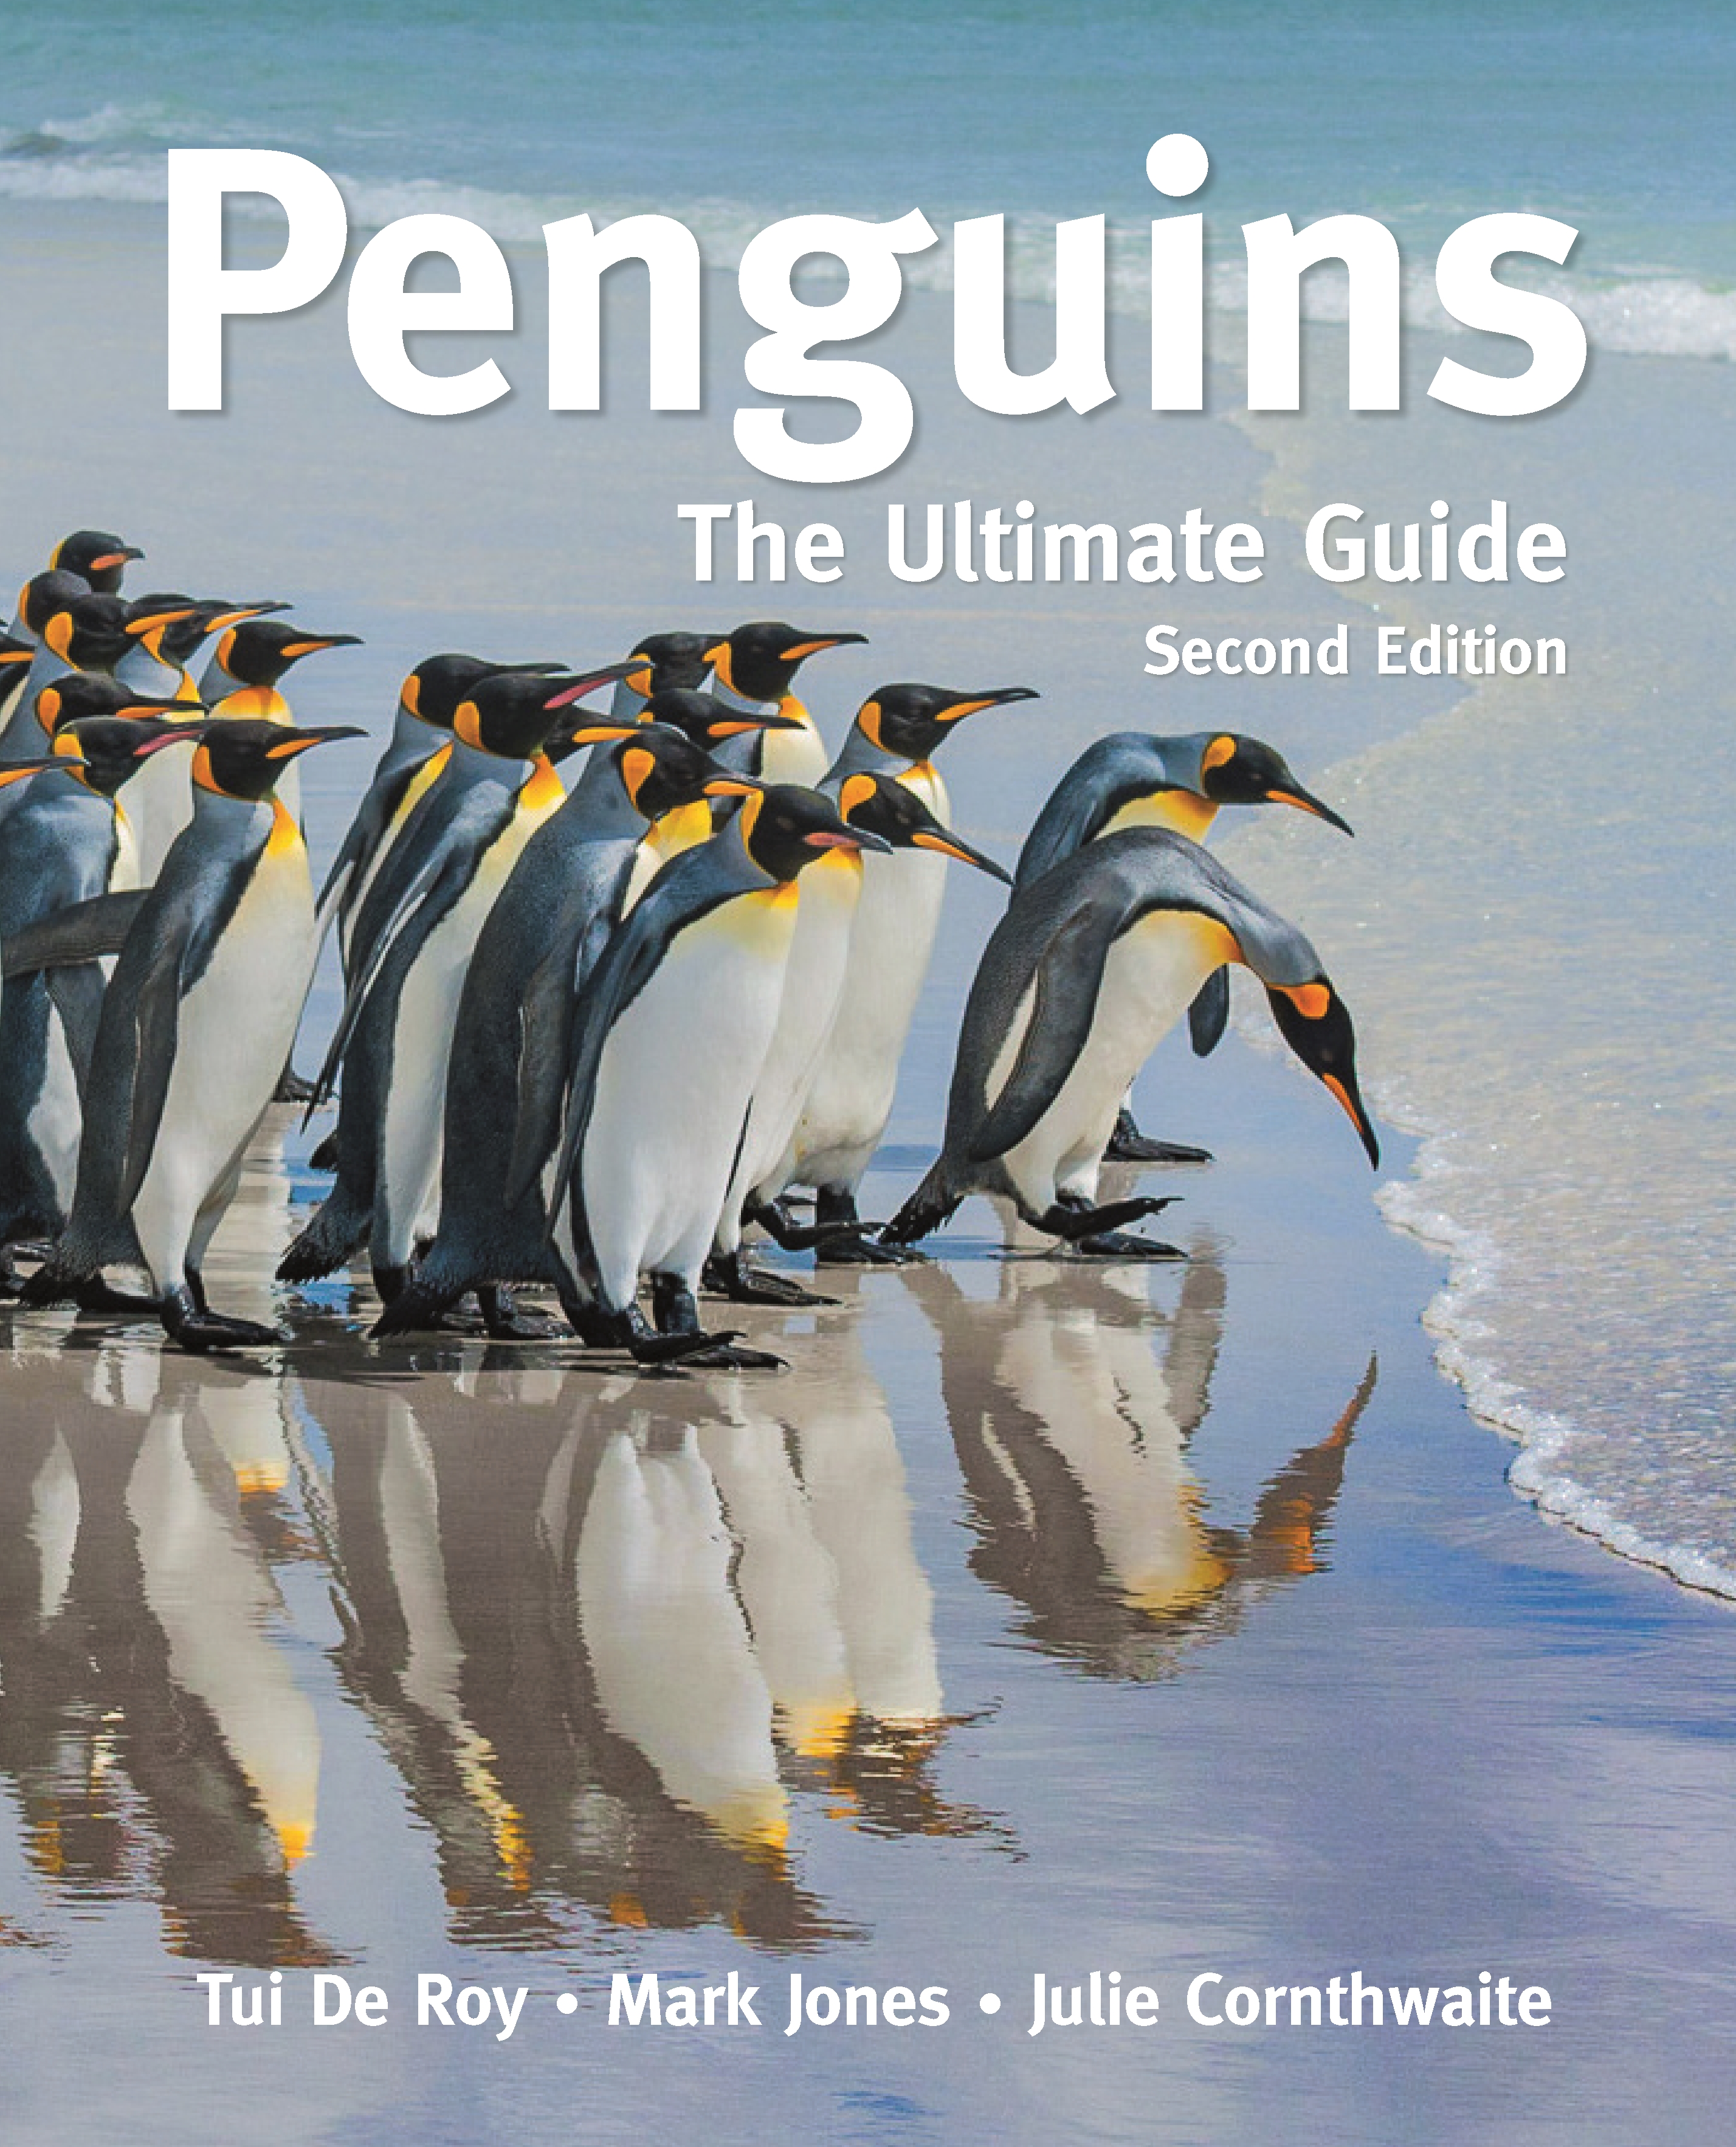 The Ultimate Pittsburgh Penguins Trivia Book: A Collection of